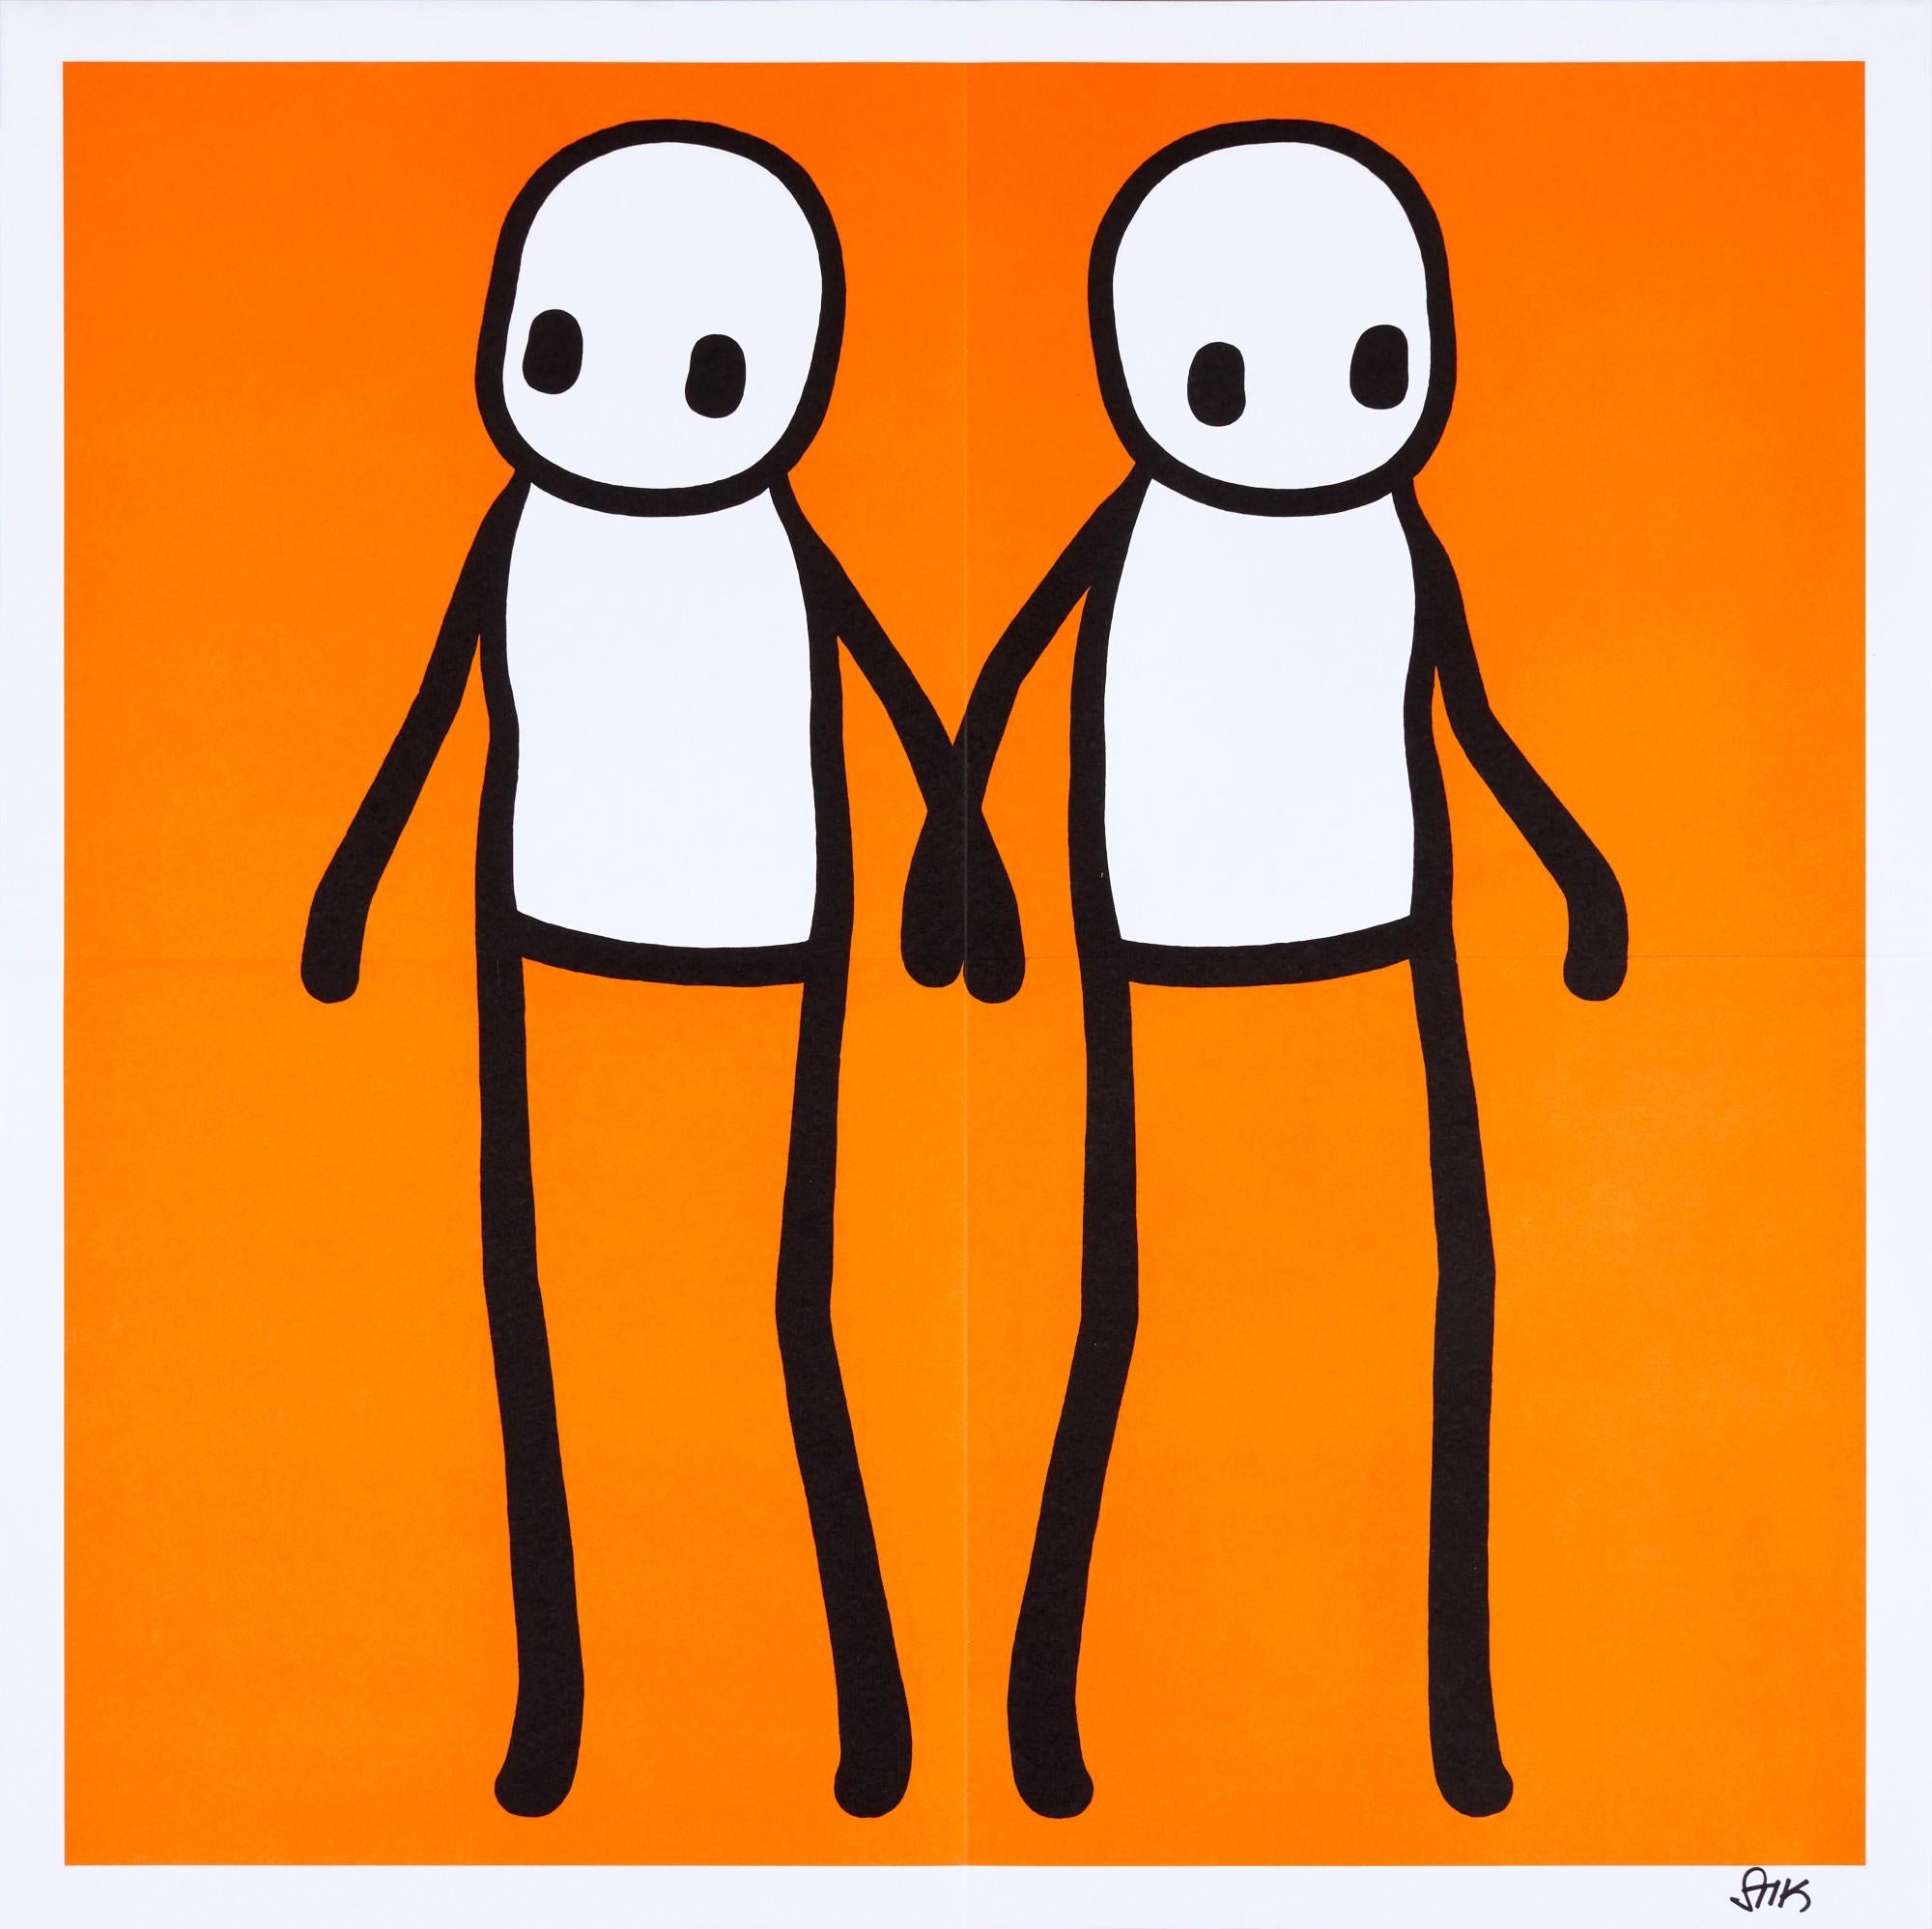 Holding Hands (Red, Yellow, Orange, Blue and Teal) - Street Art Art by Stik